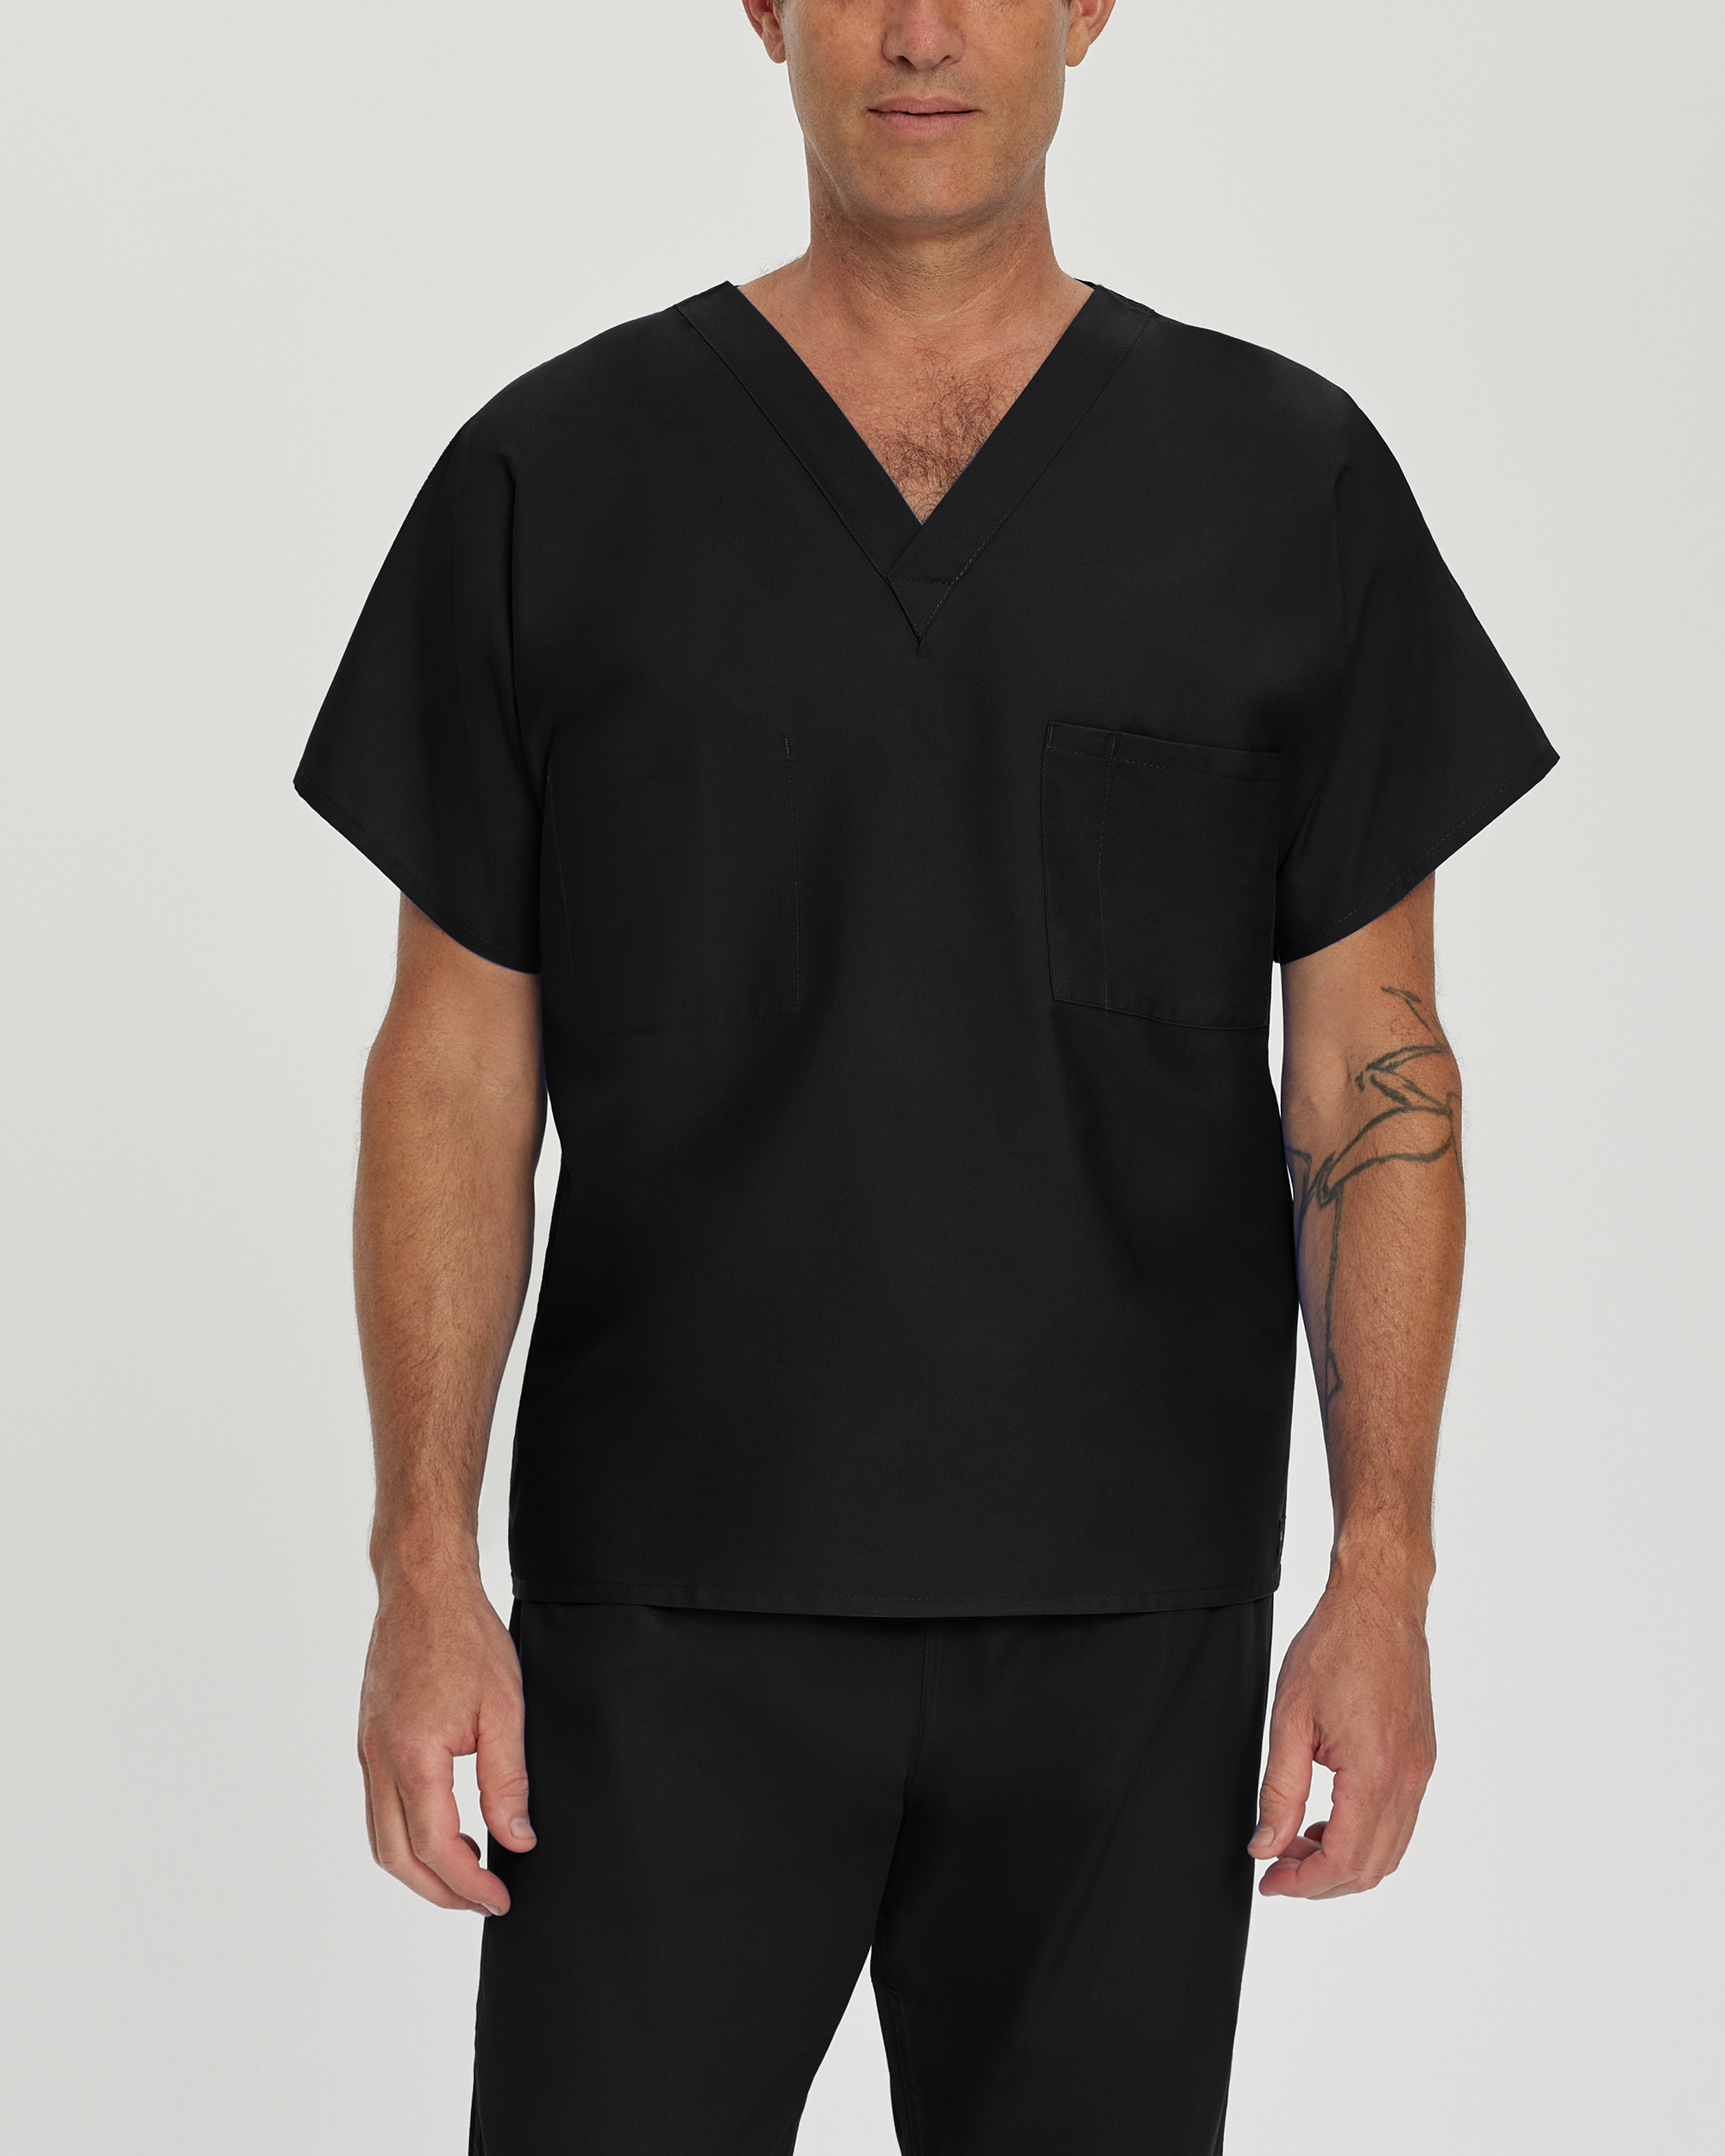 What fabric is the Landau 1 pocket scrub top made of?